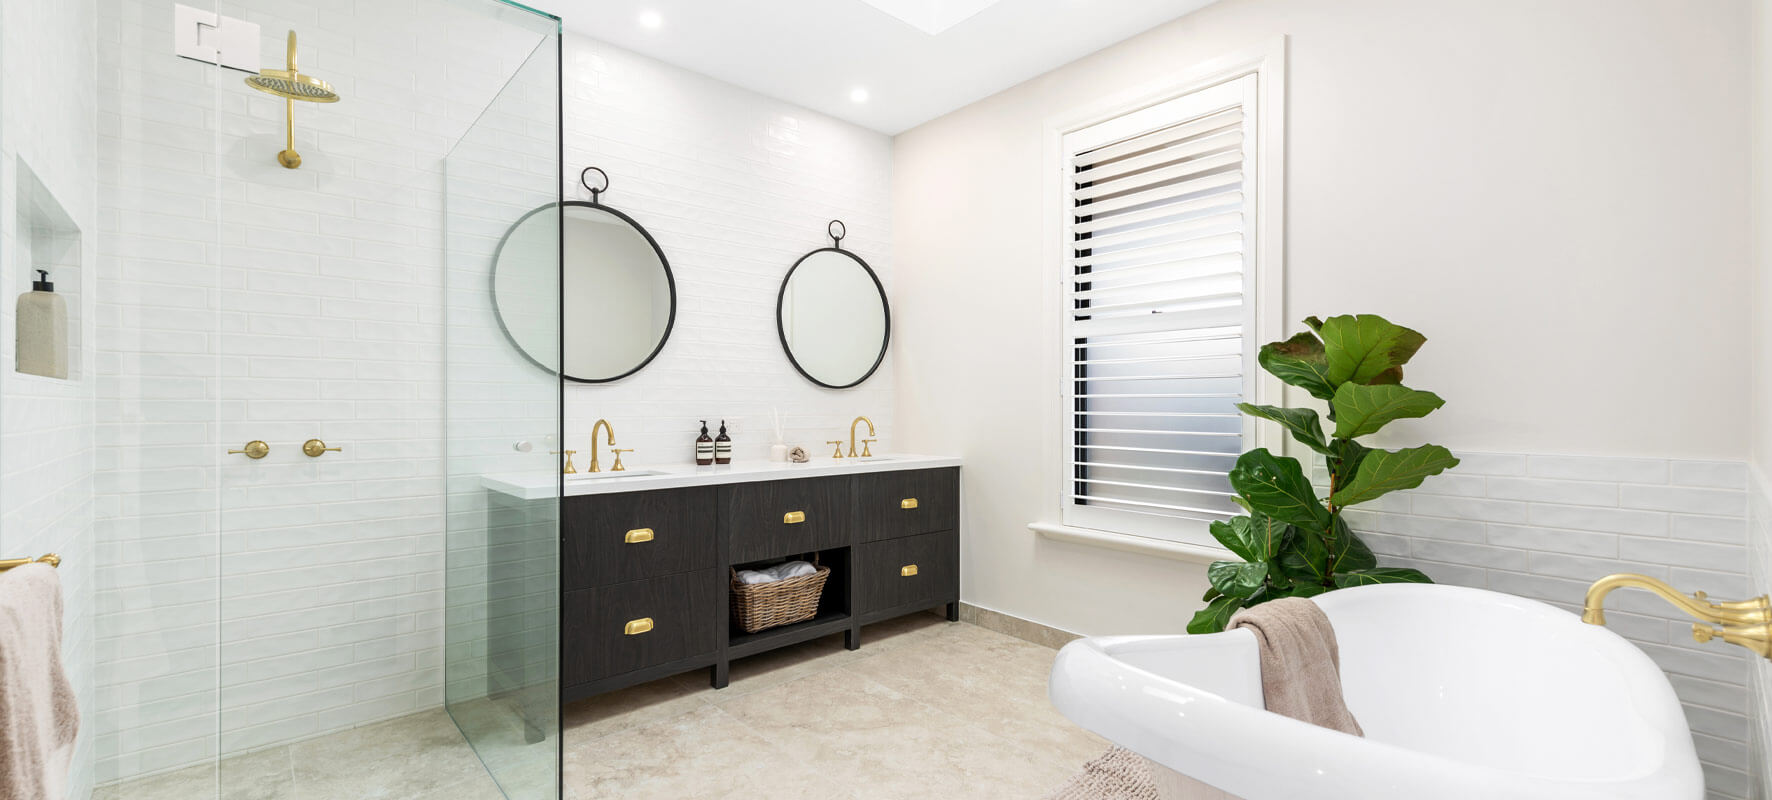 Photo of bathroom in Ranch style home showing white bathtub, timber vanity with two sinks and clear glass shower